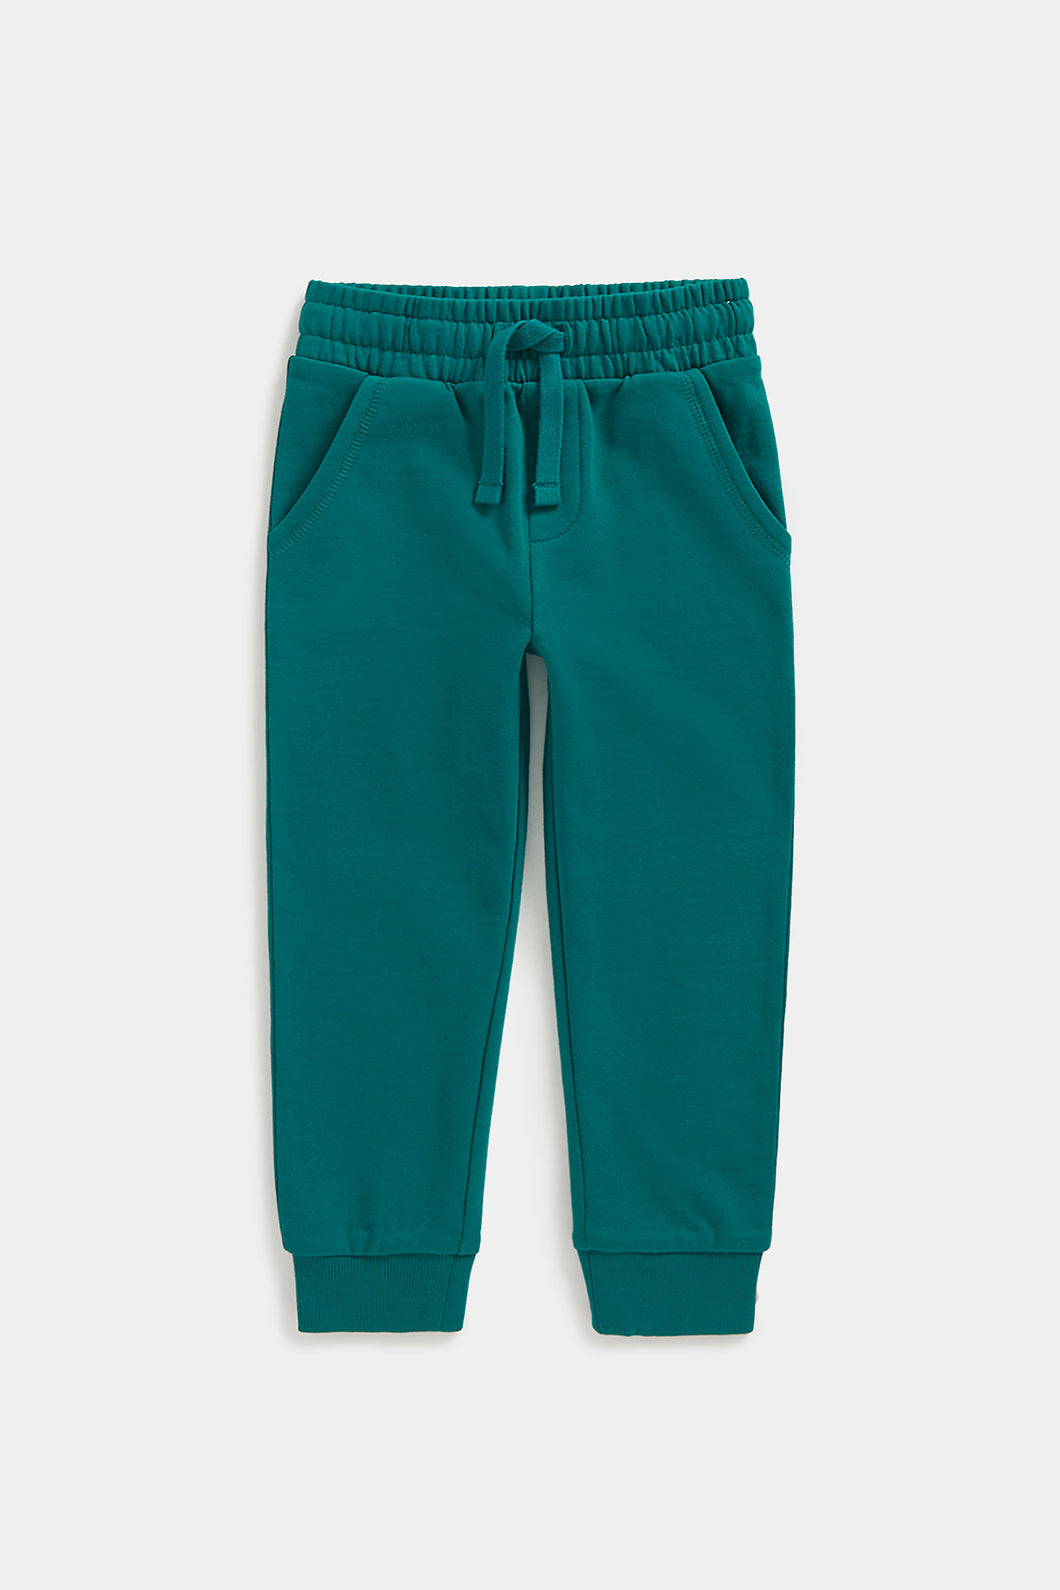 Mothercare Green Joggers